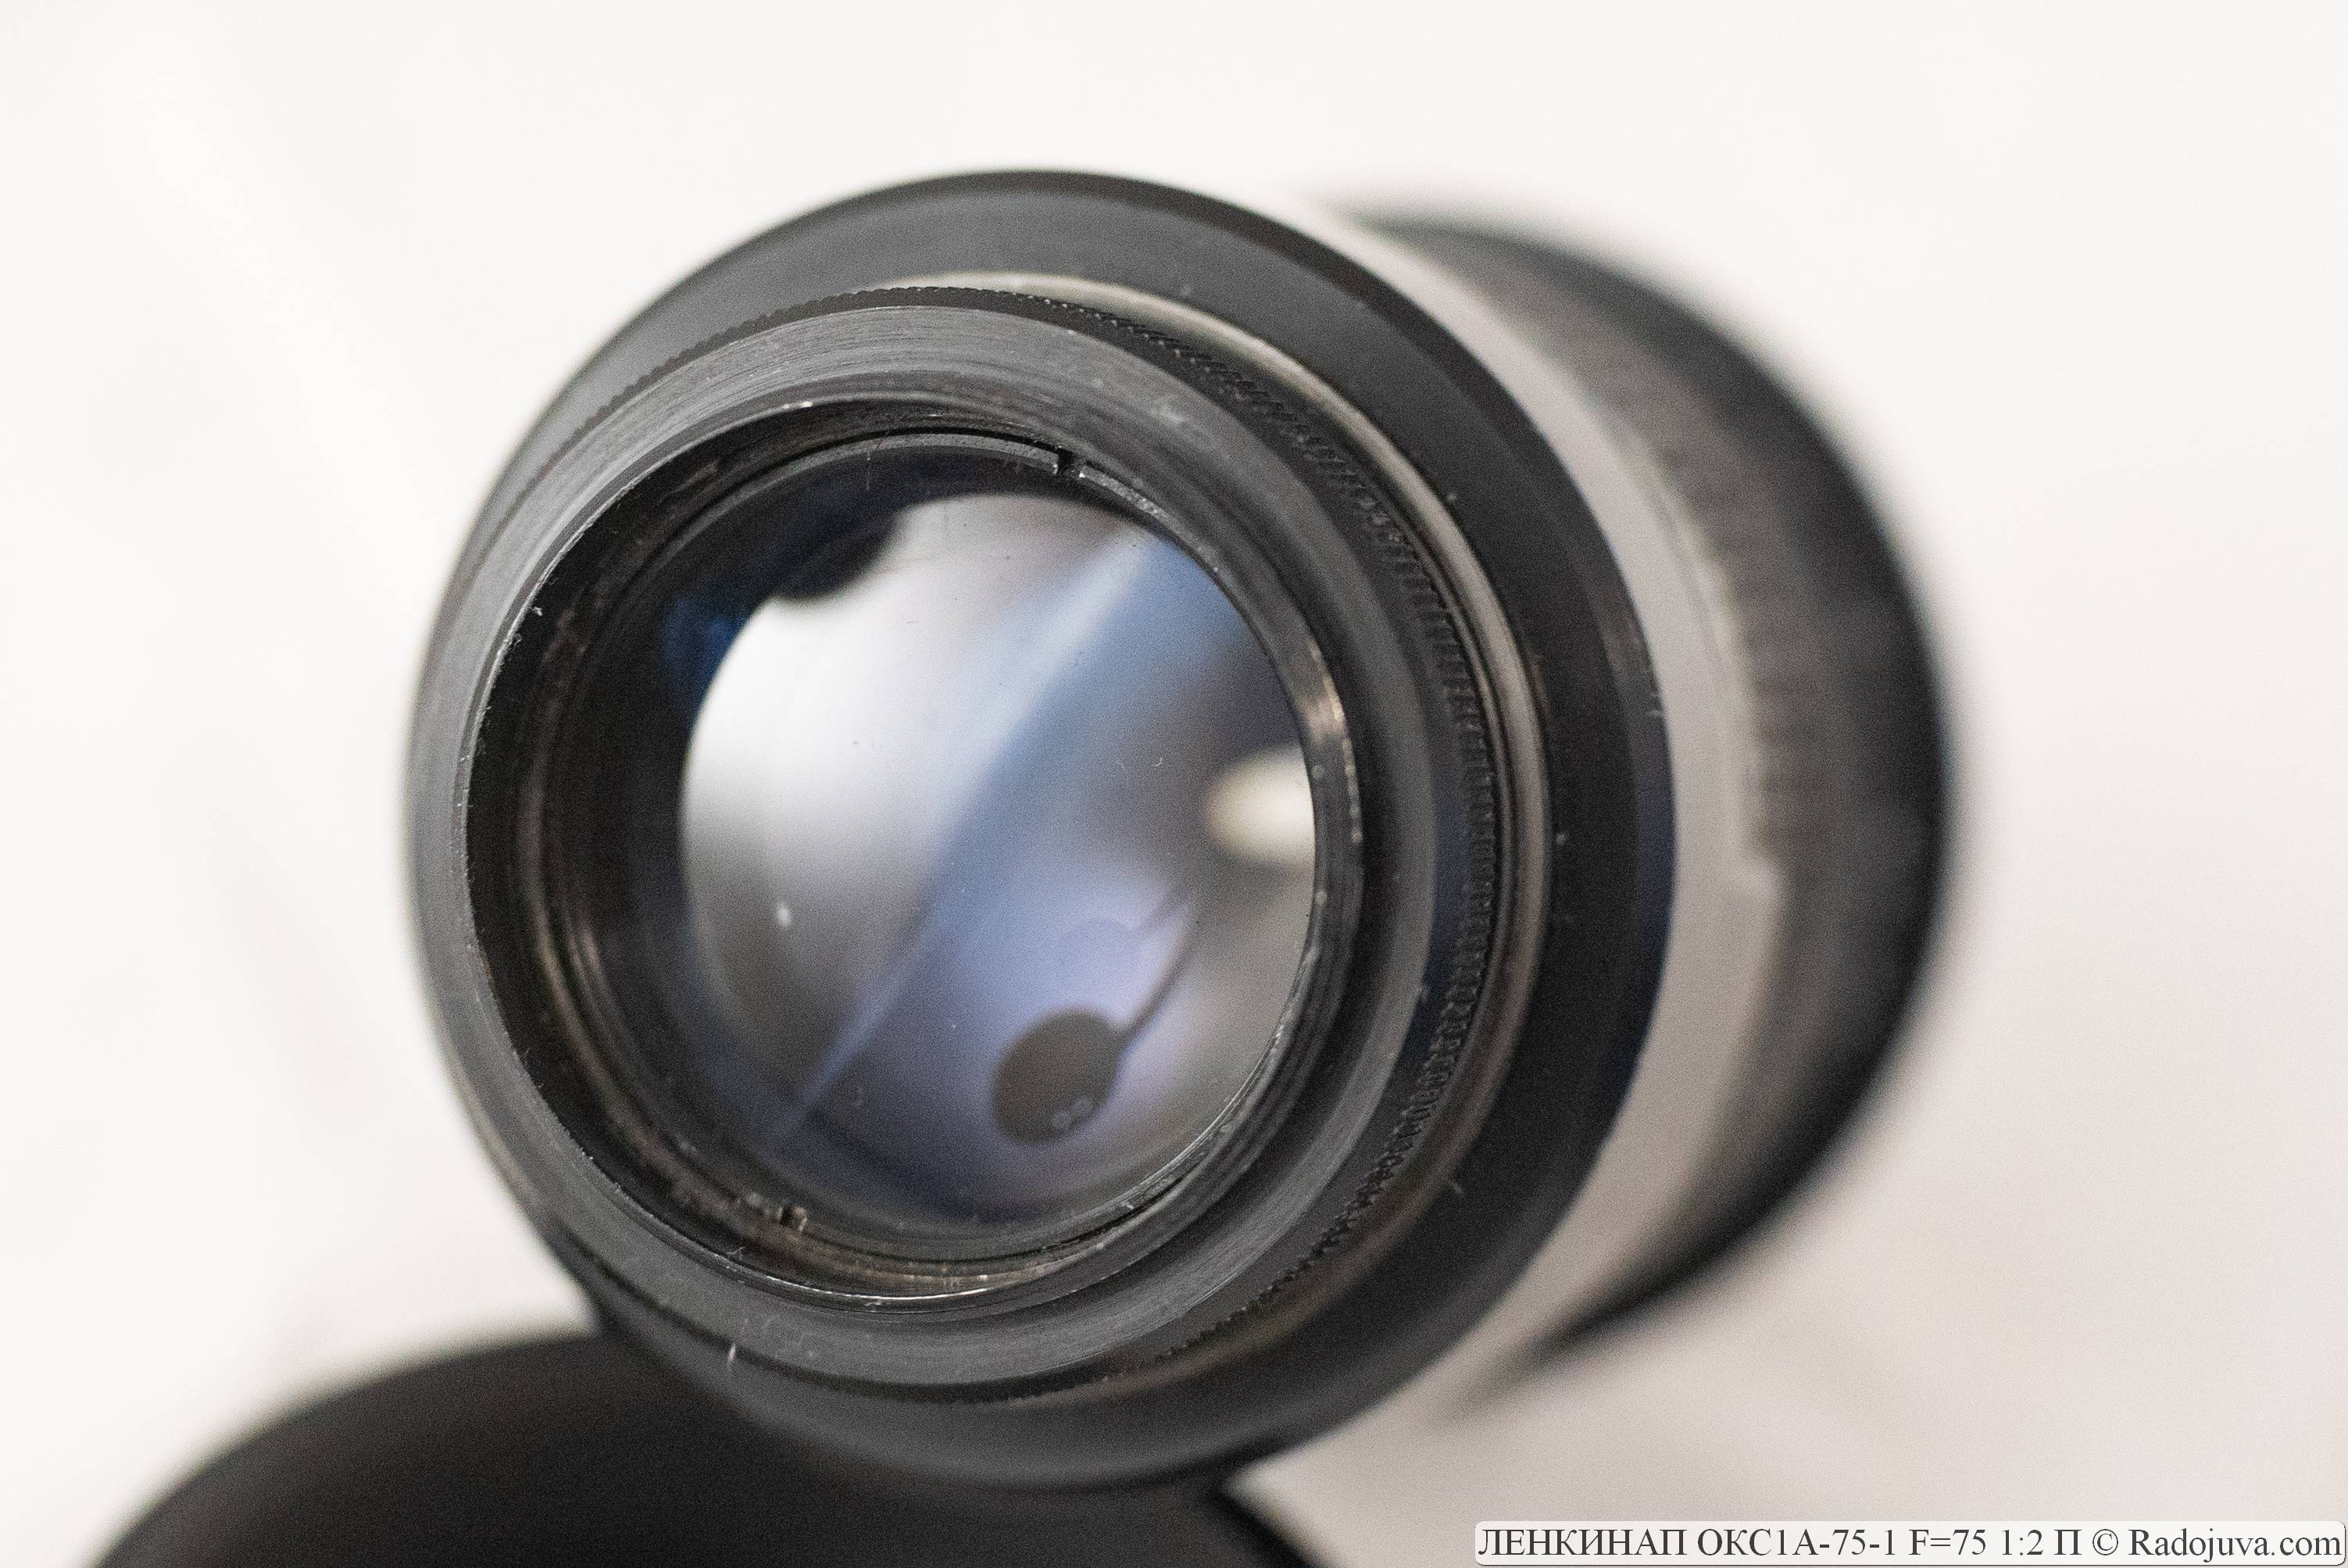 All objective lenses have a pale blue AR coating.